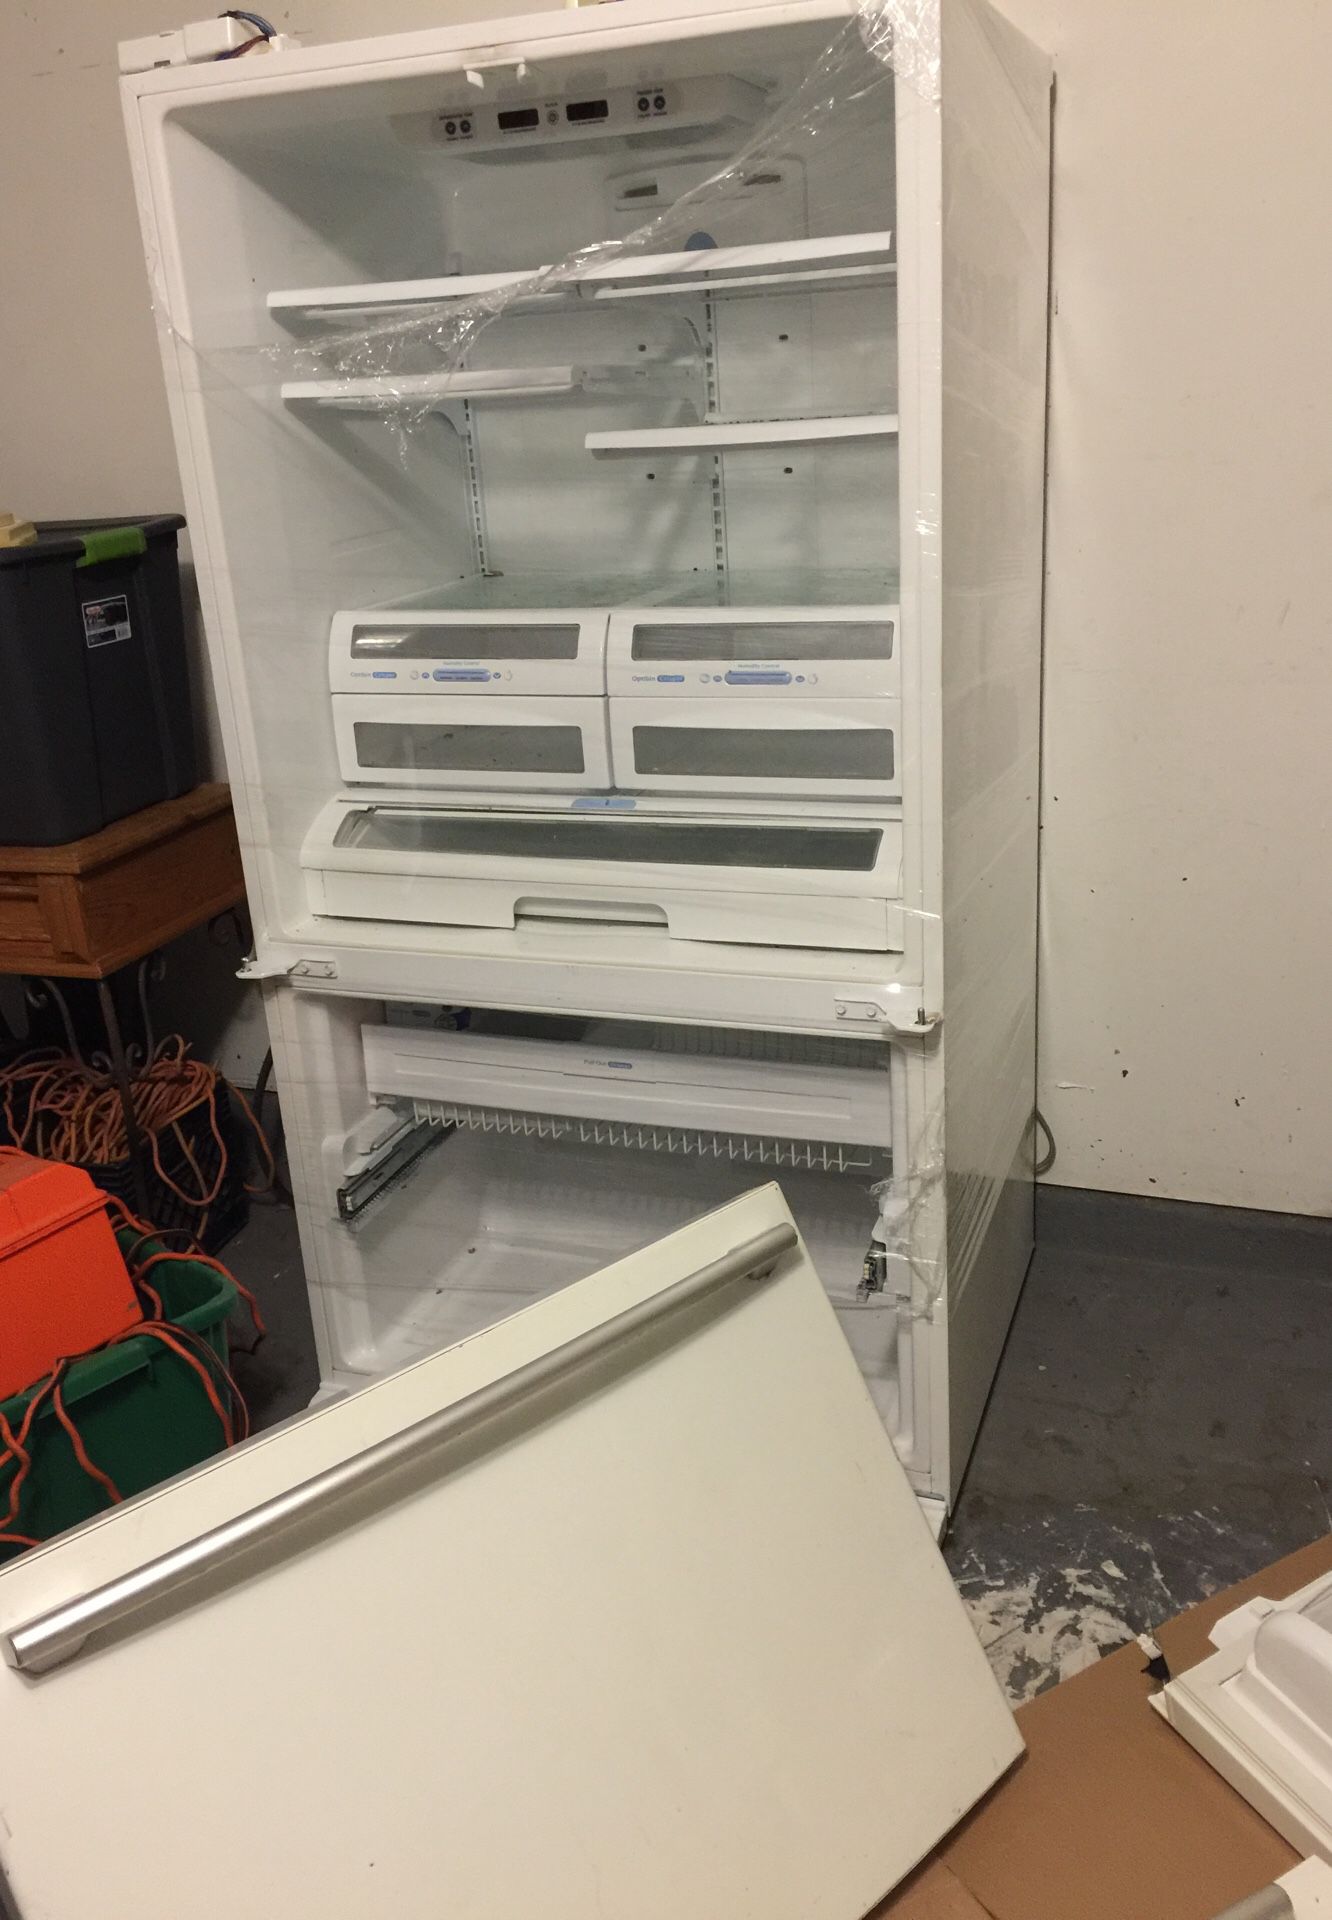 Large refrigerator, works perfectly